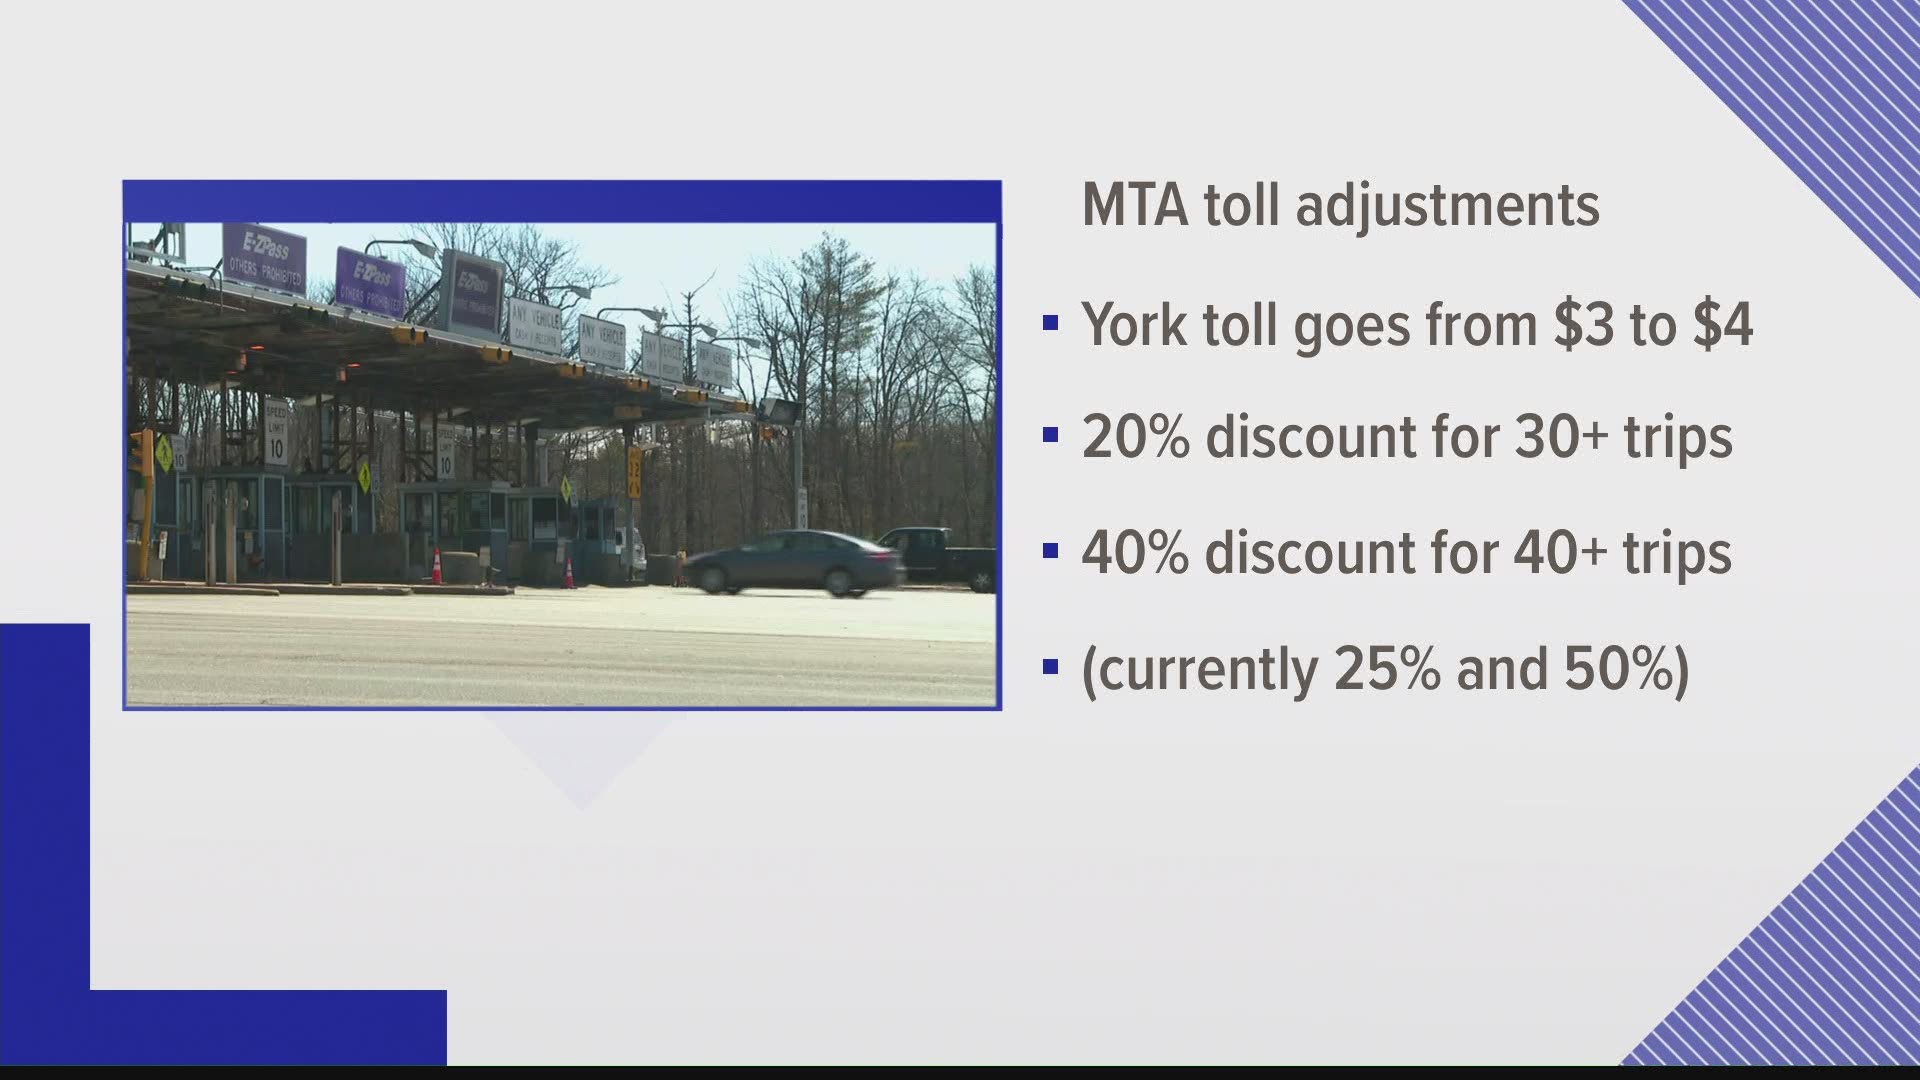 The increased cost for in-state users is an average of about $0.20 per trip, MTA said in a press release about lowering E-ZPass discounts and raising York toll rates